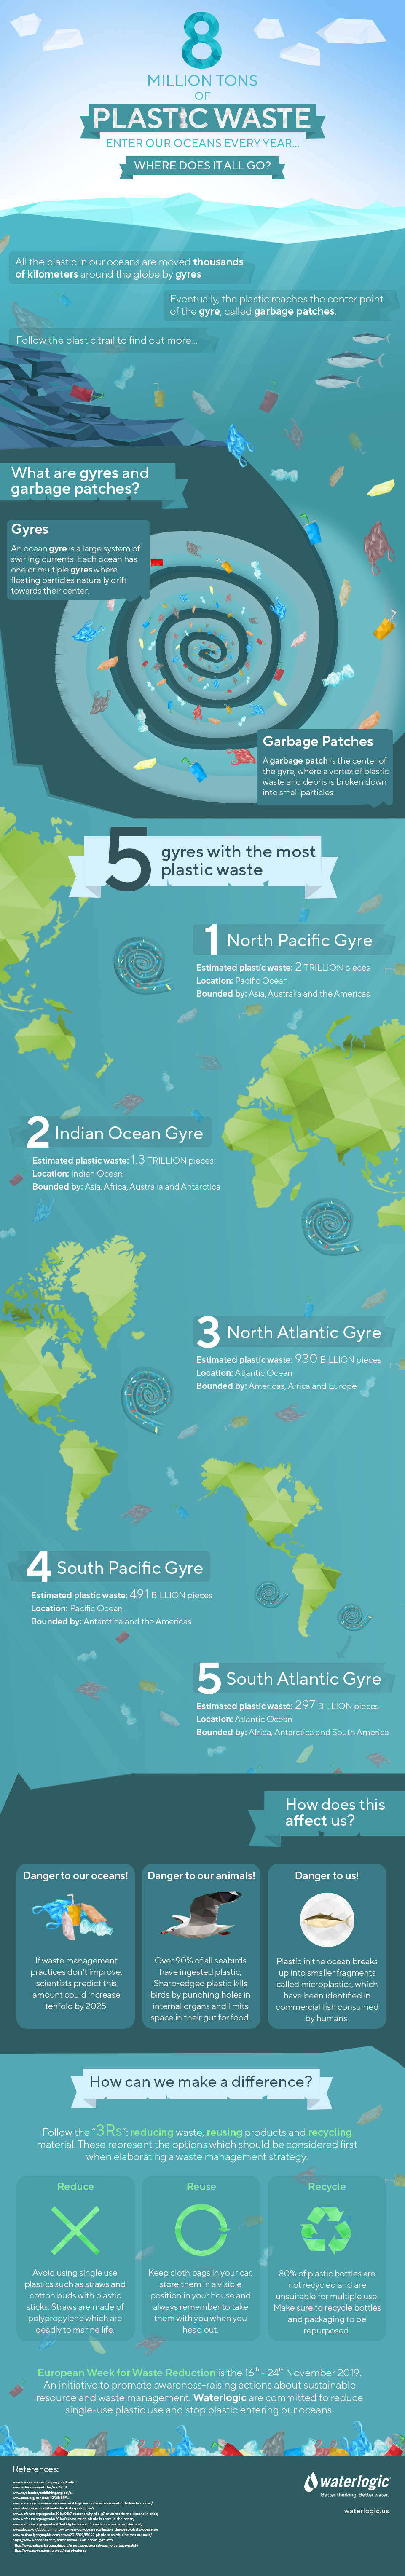 Infographic: plastic waste in our oceans